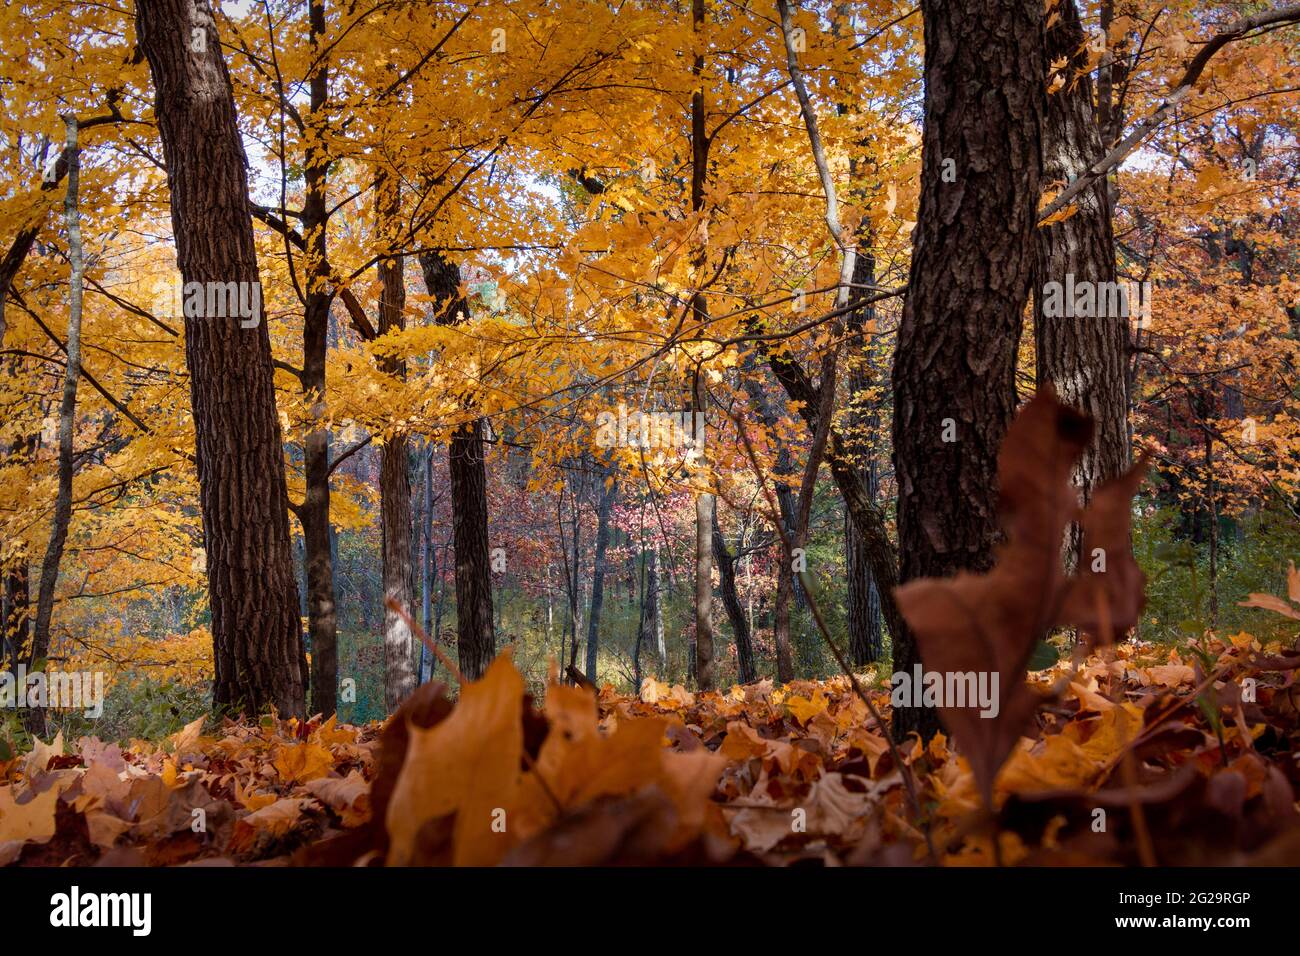 A wisconsin woods with golden fall maples and oaks with the view from the ground looking down into a small valley. Stock Photo